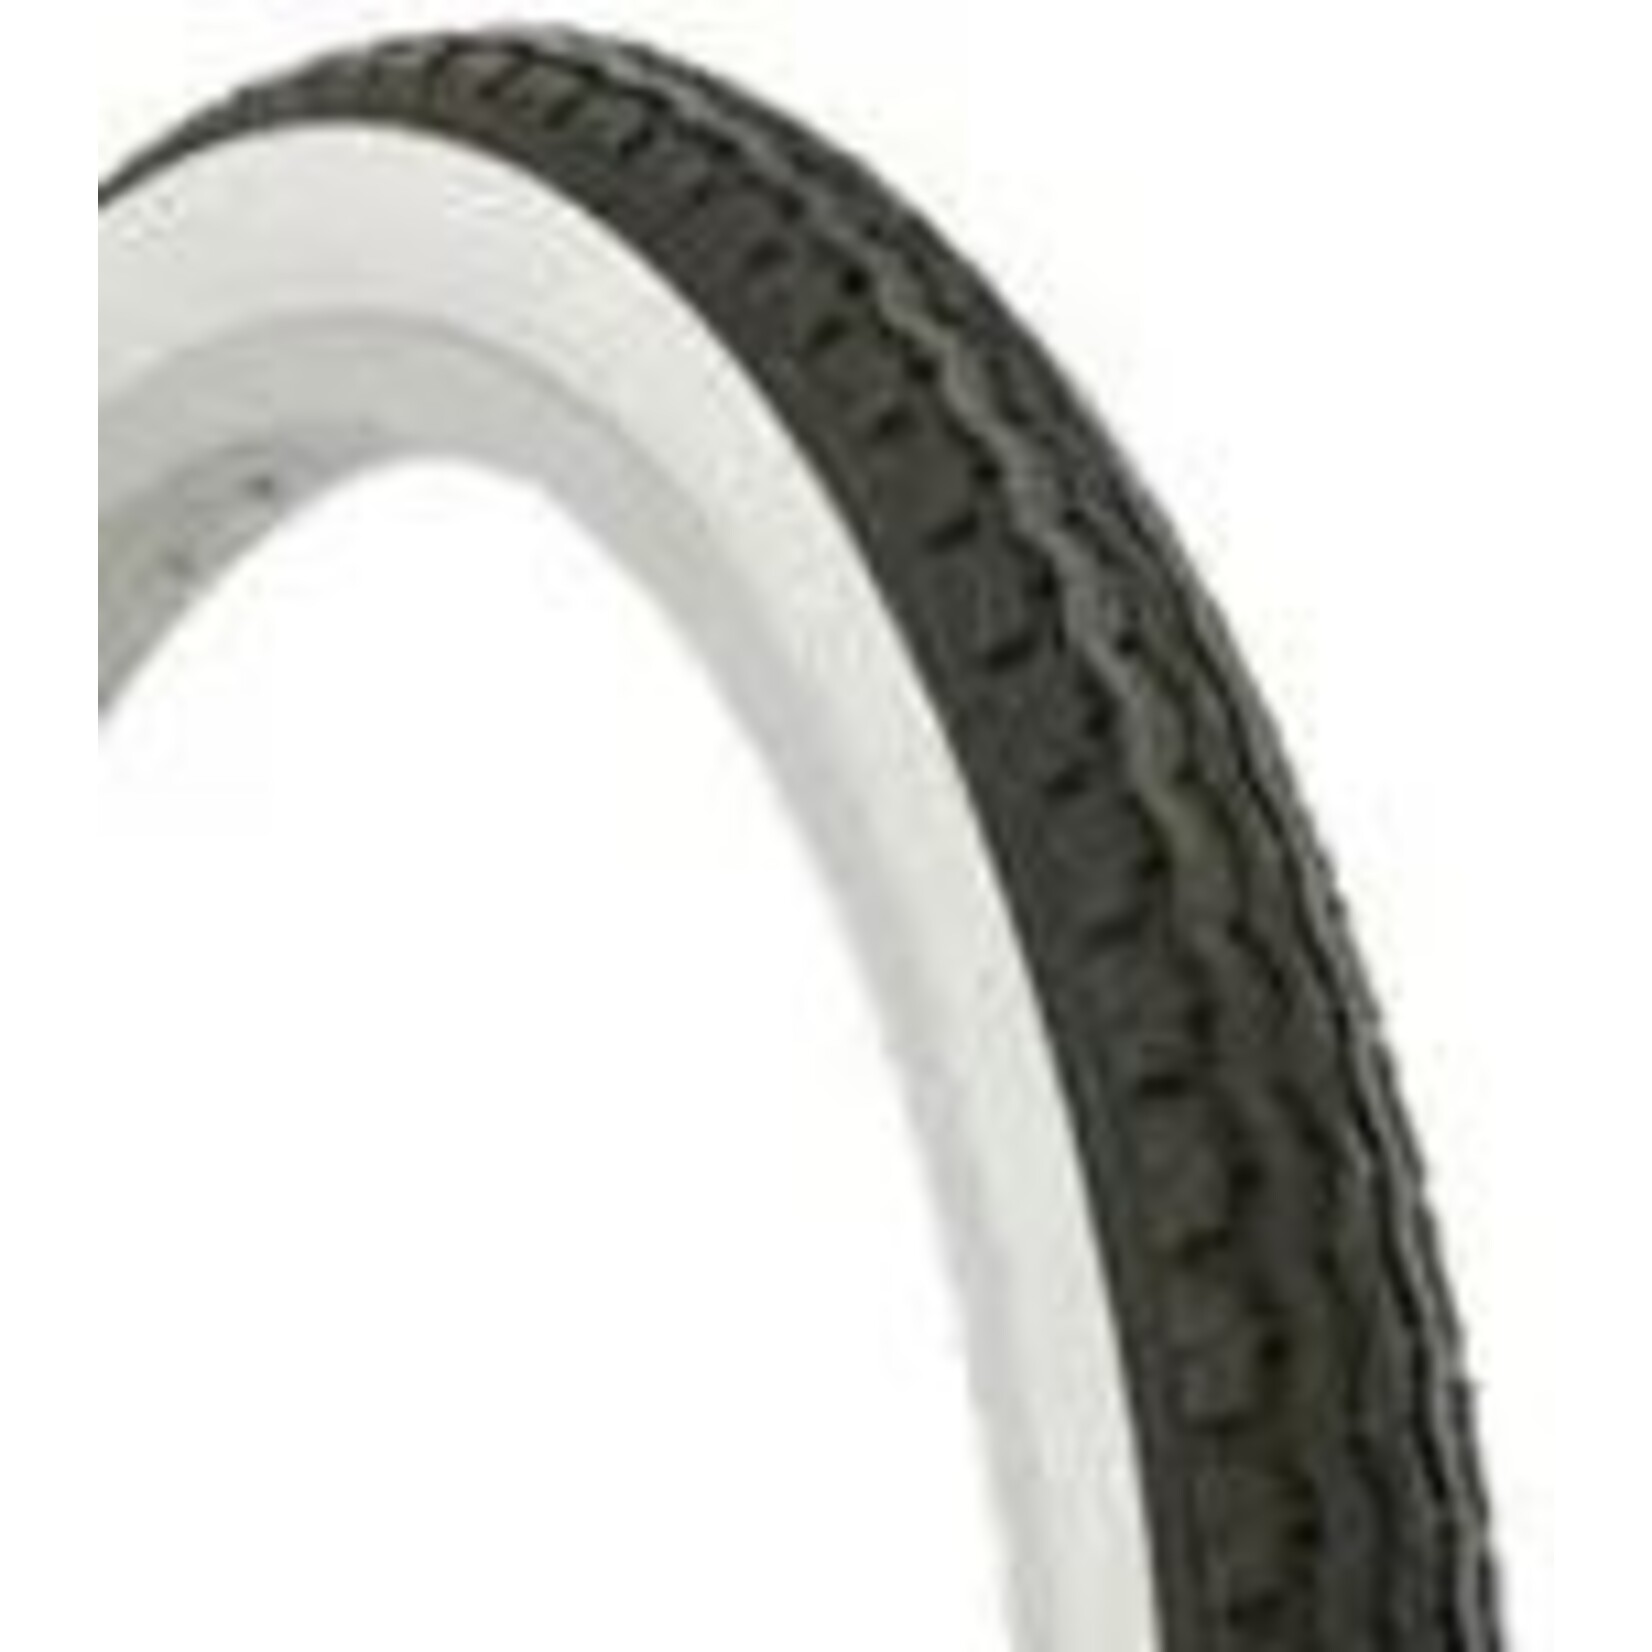 Duro Duro Bicycle Tyre - 20 X 1.75 (47X406) - Black With White Wall City Tread - Pair